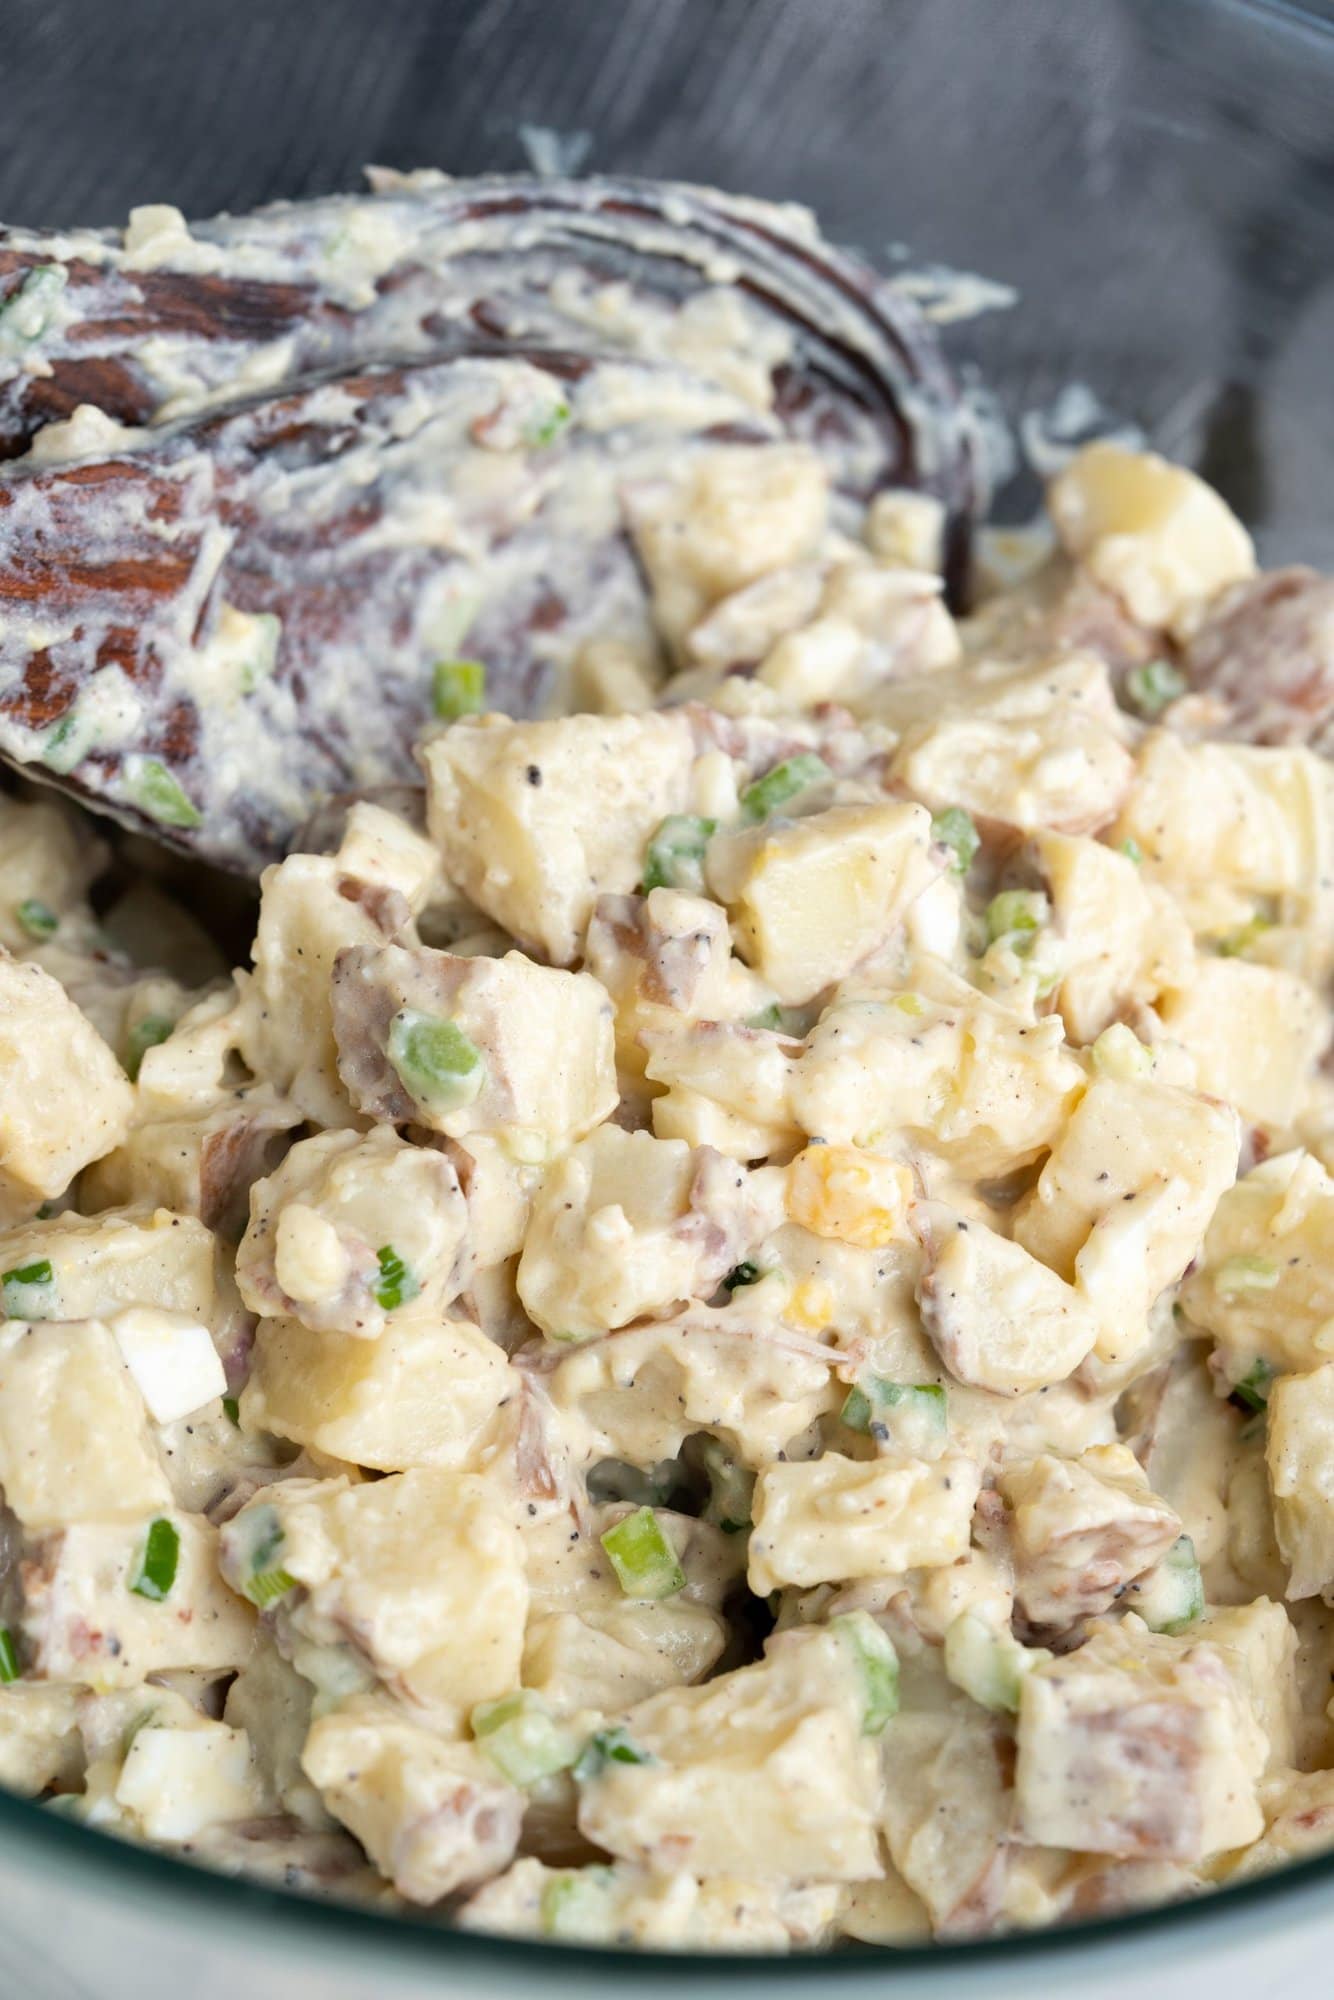 Creamy red potato Potato salad made with red-skinned potatoes, mayo-based dressing, and topped with bacon is one of the best side dishes for BBQs, potlucks etc.